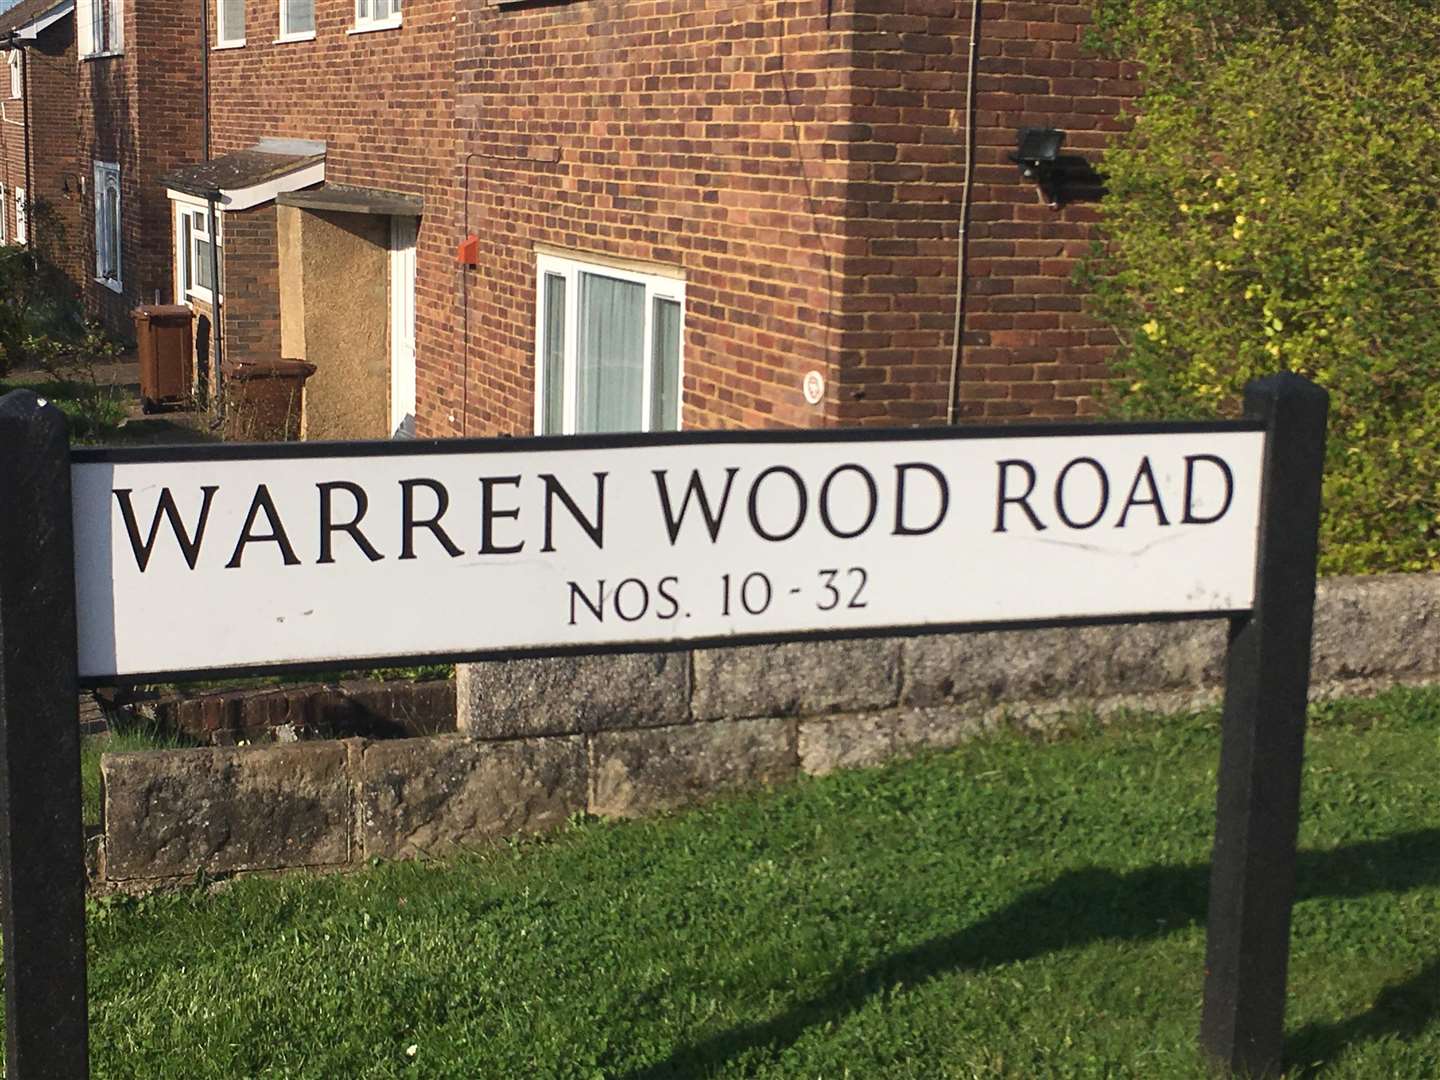 Warren Wood Road, where police raided the home of Lewis Ludlow